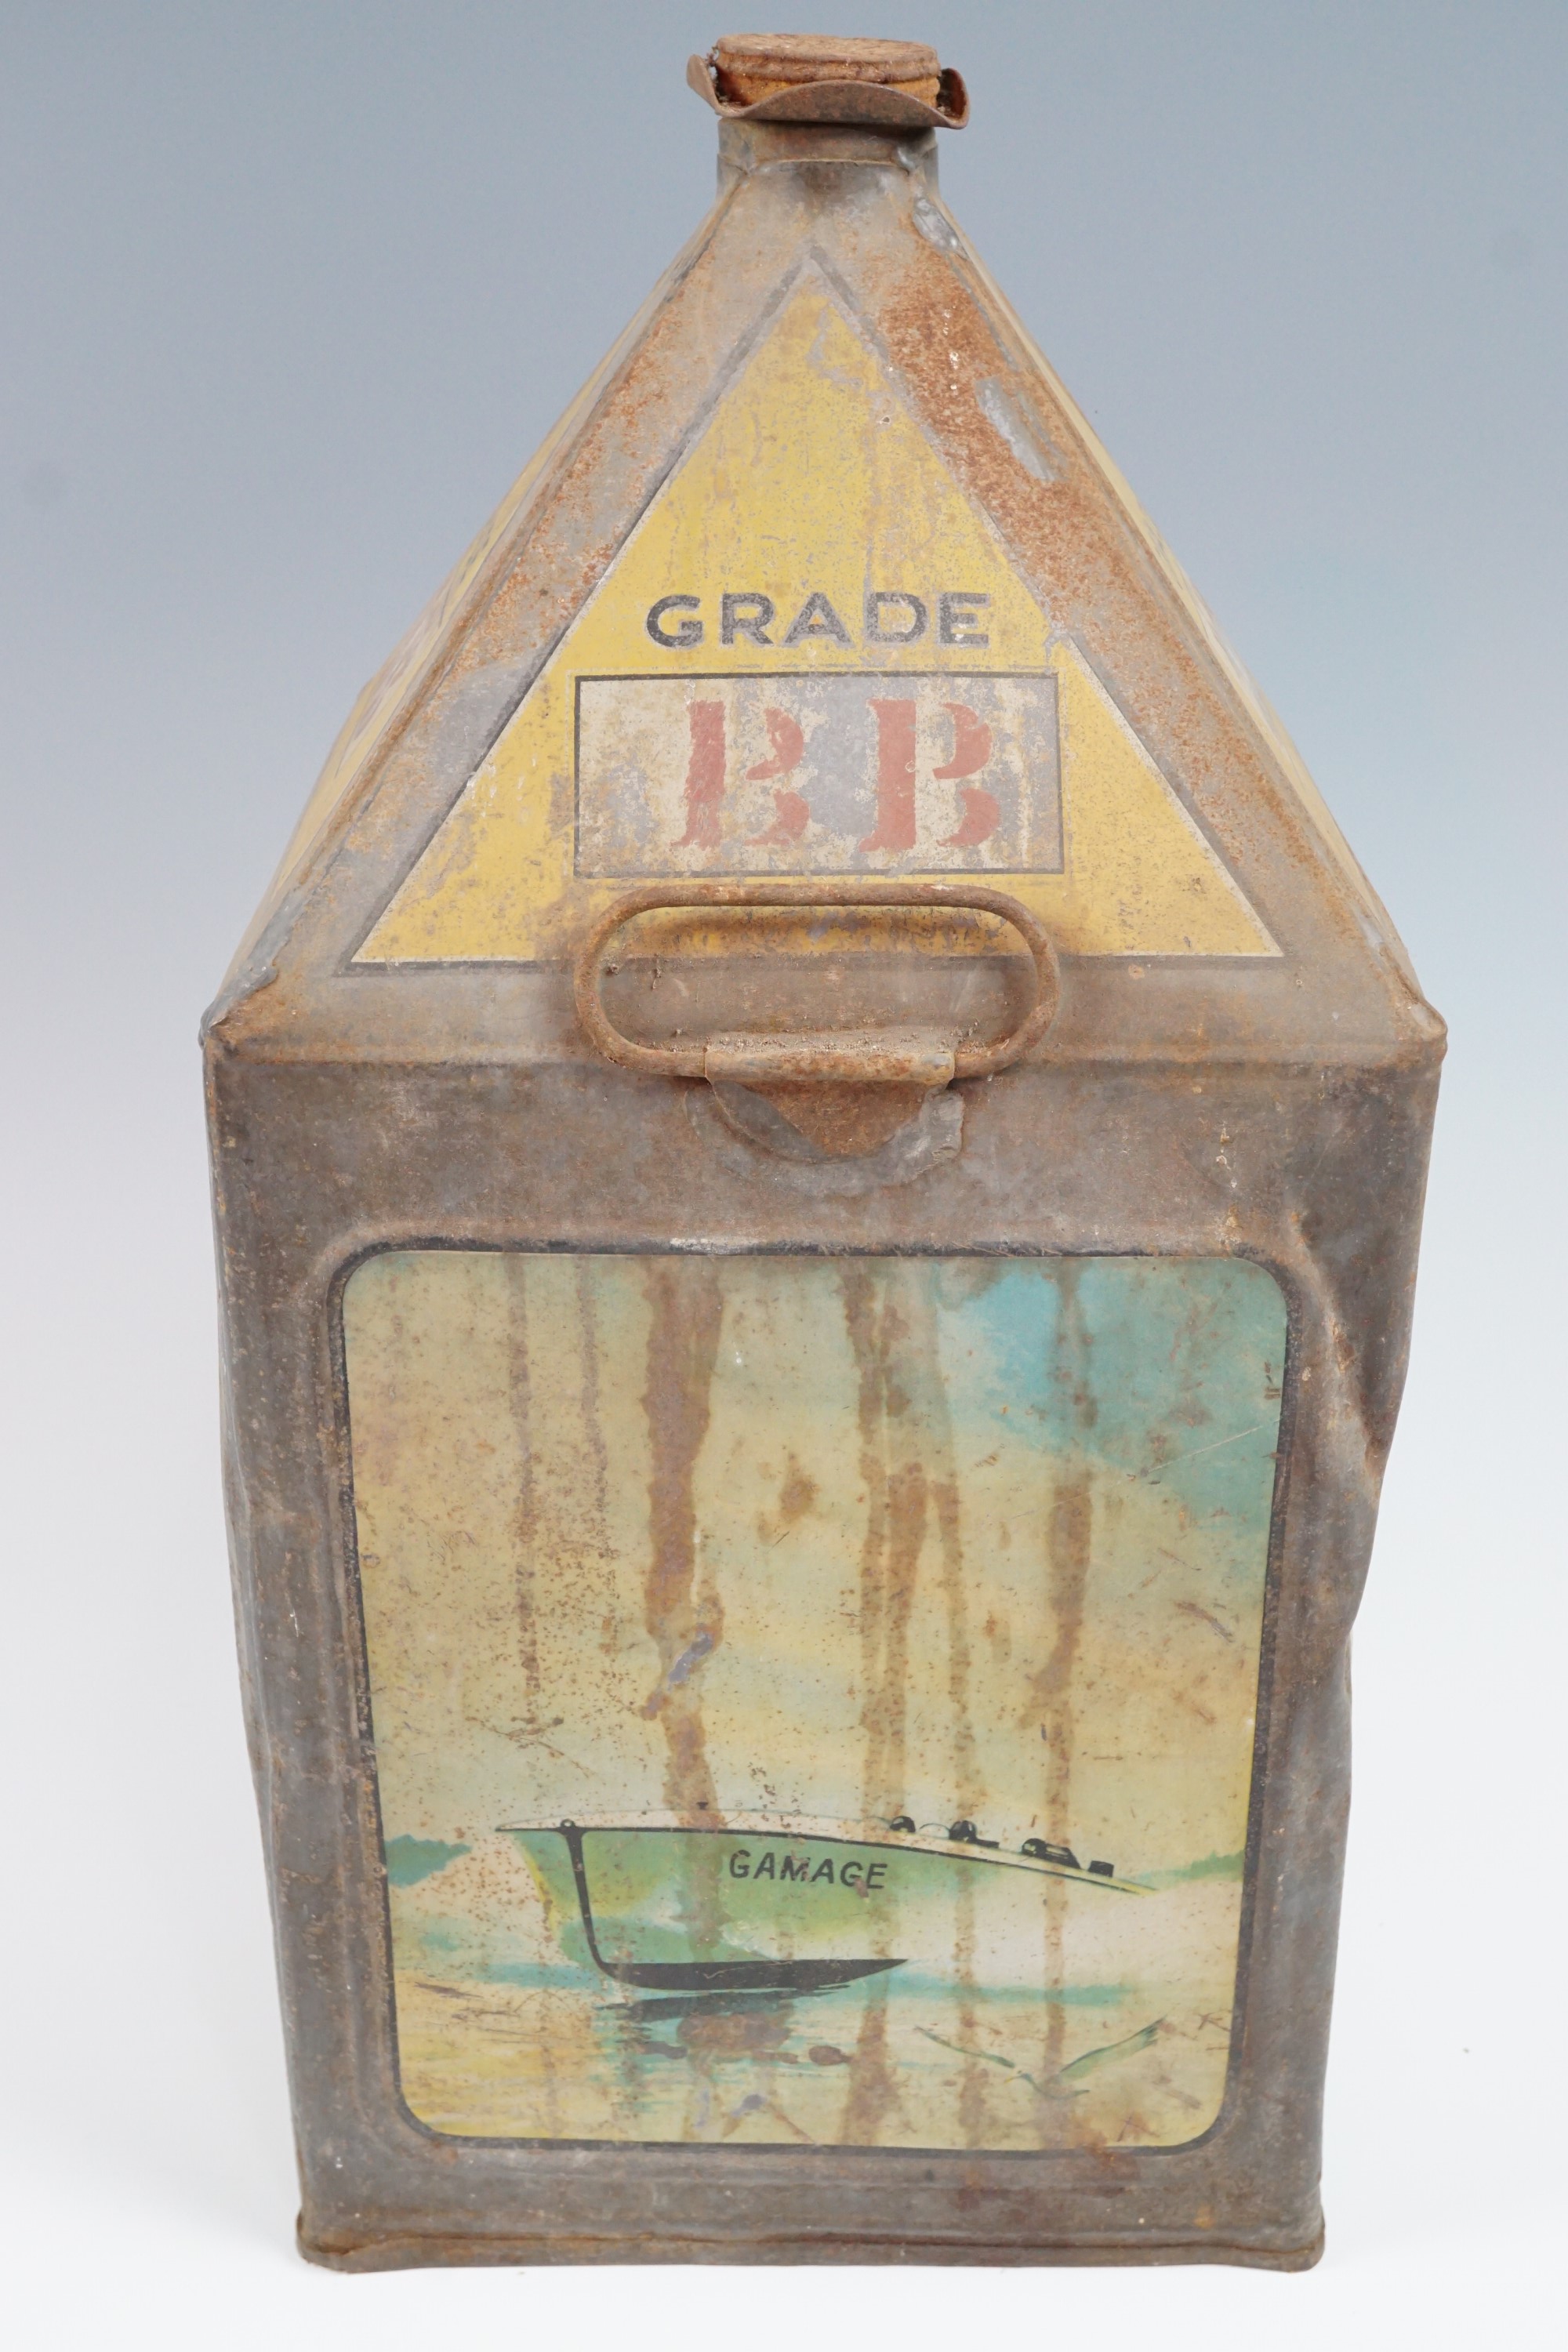 A 1930s Gamages 5-gallon fuel oil can, of so-called "pyramid" form, lithographically printed in - Image 2 of 8